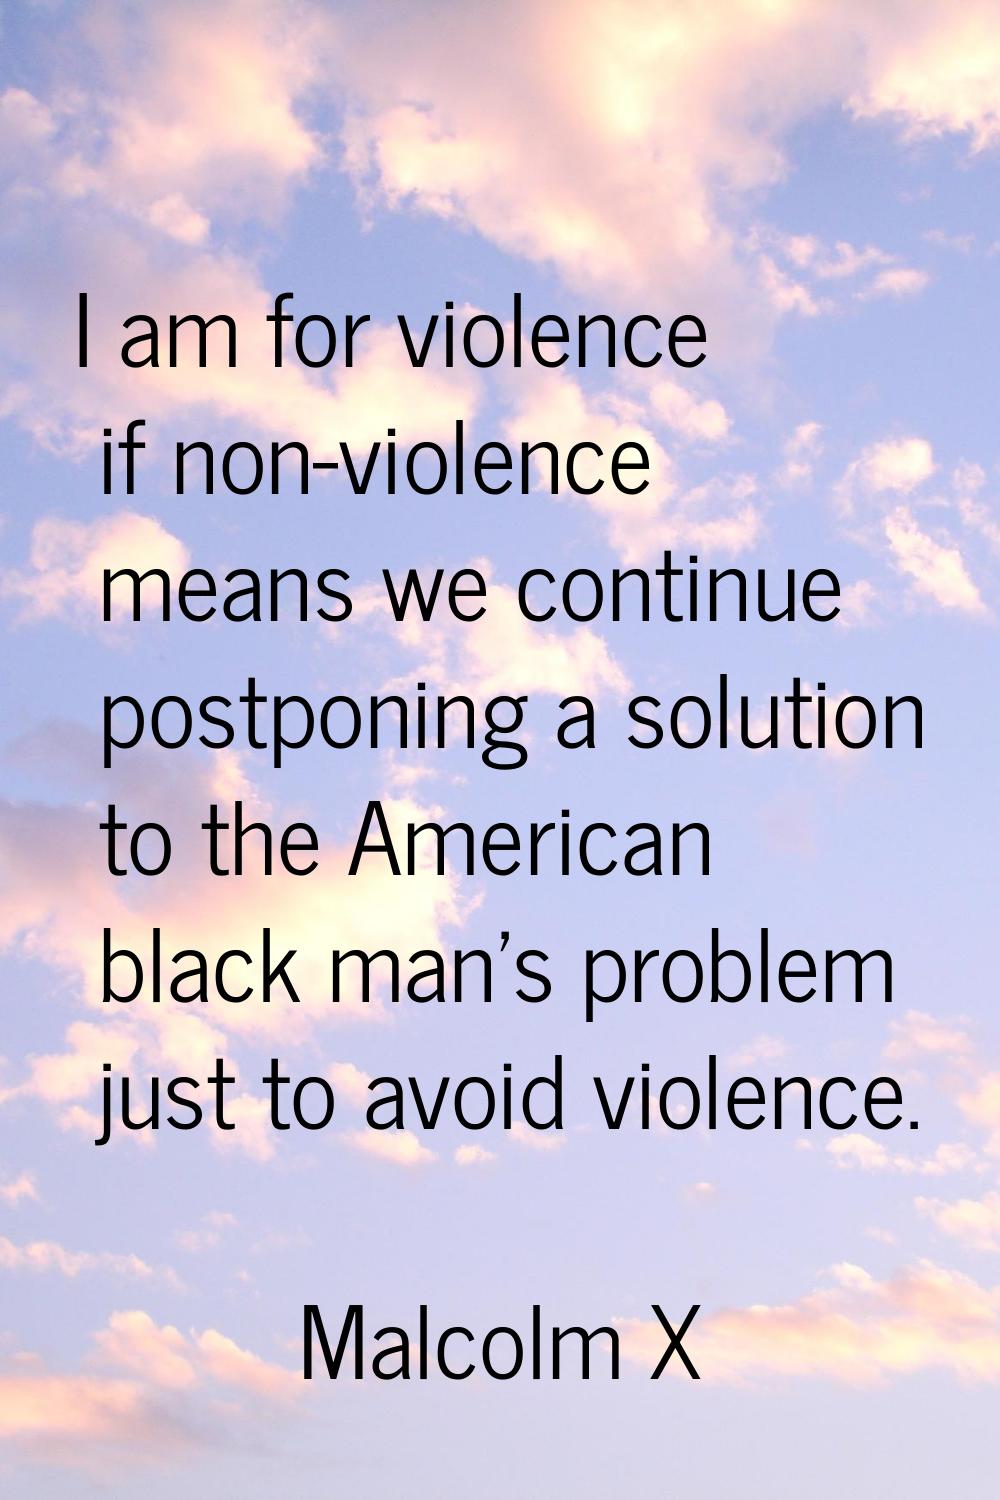 I am for violence if non-violence means we continue postponing a solution to the American black man